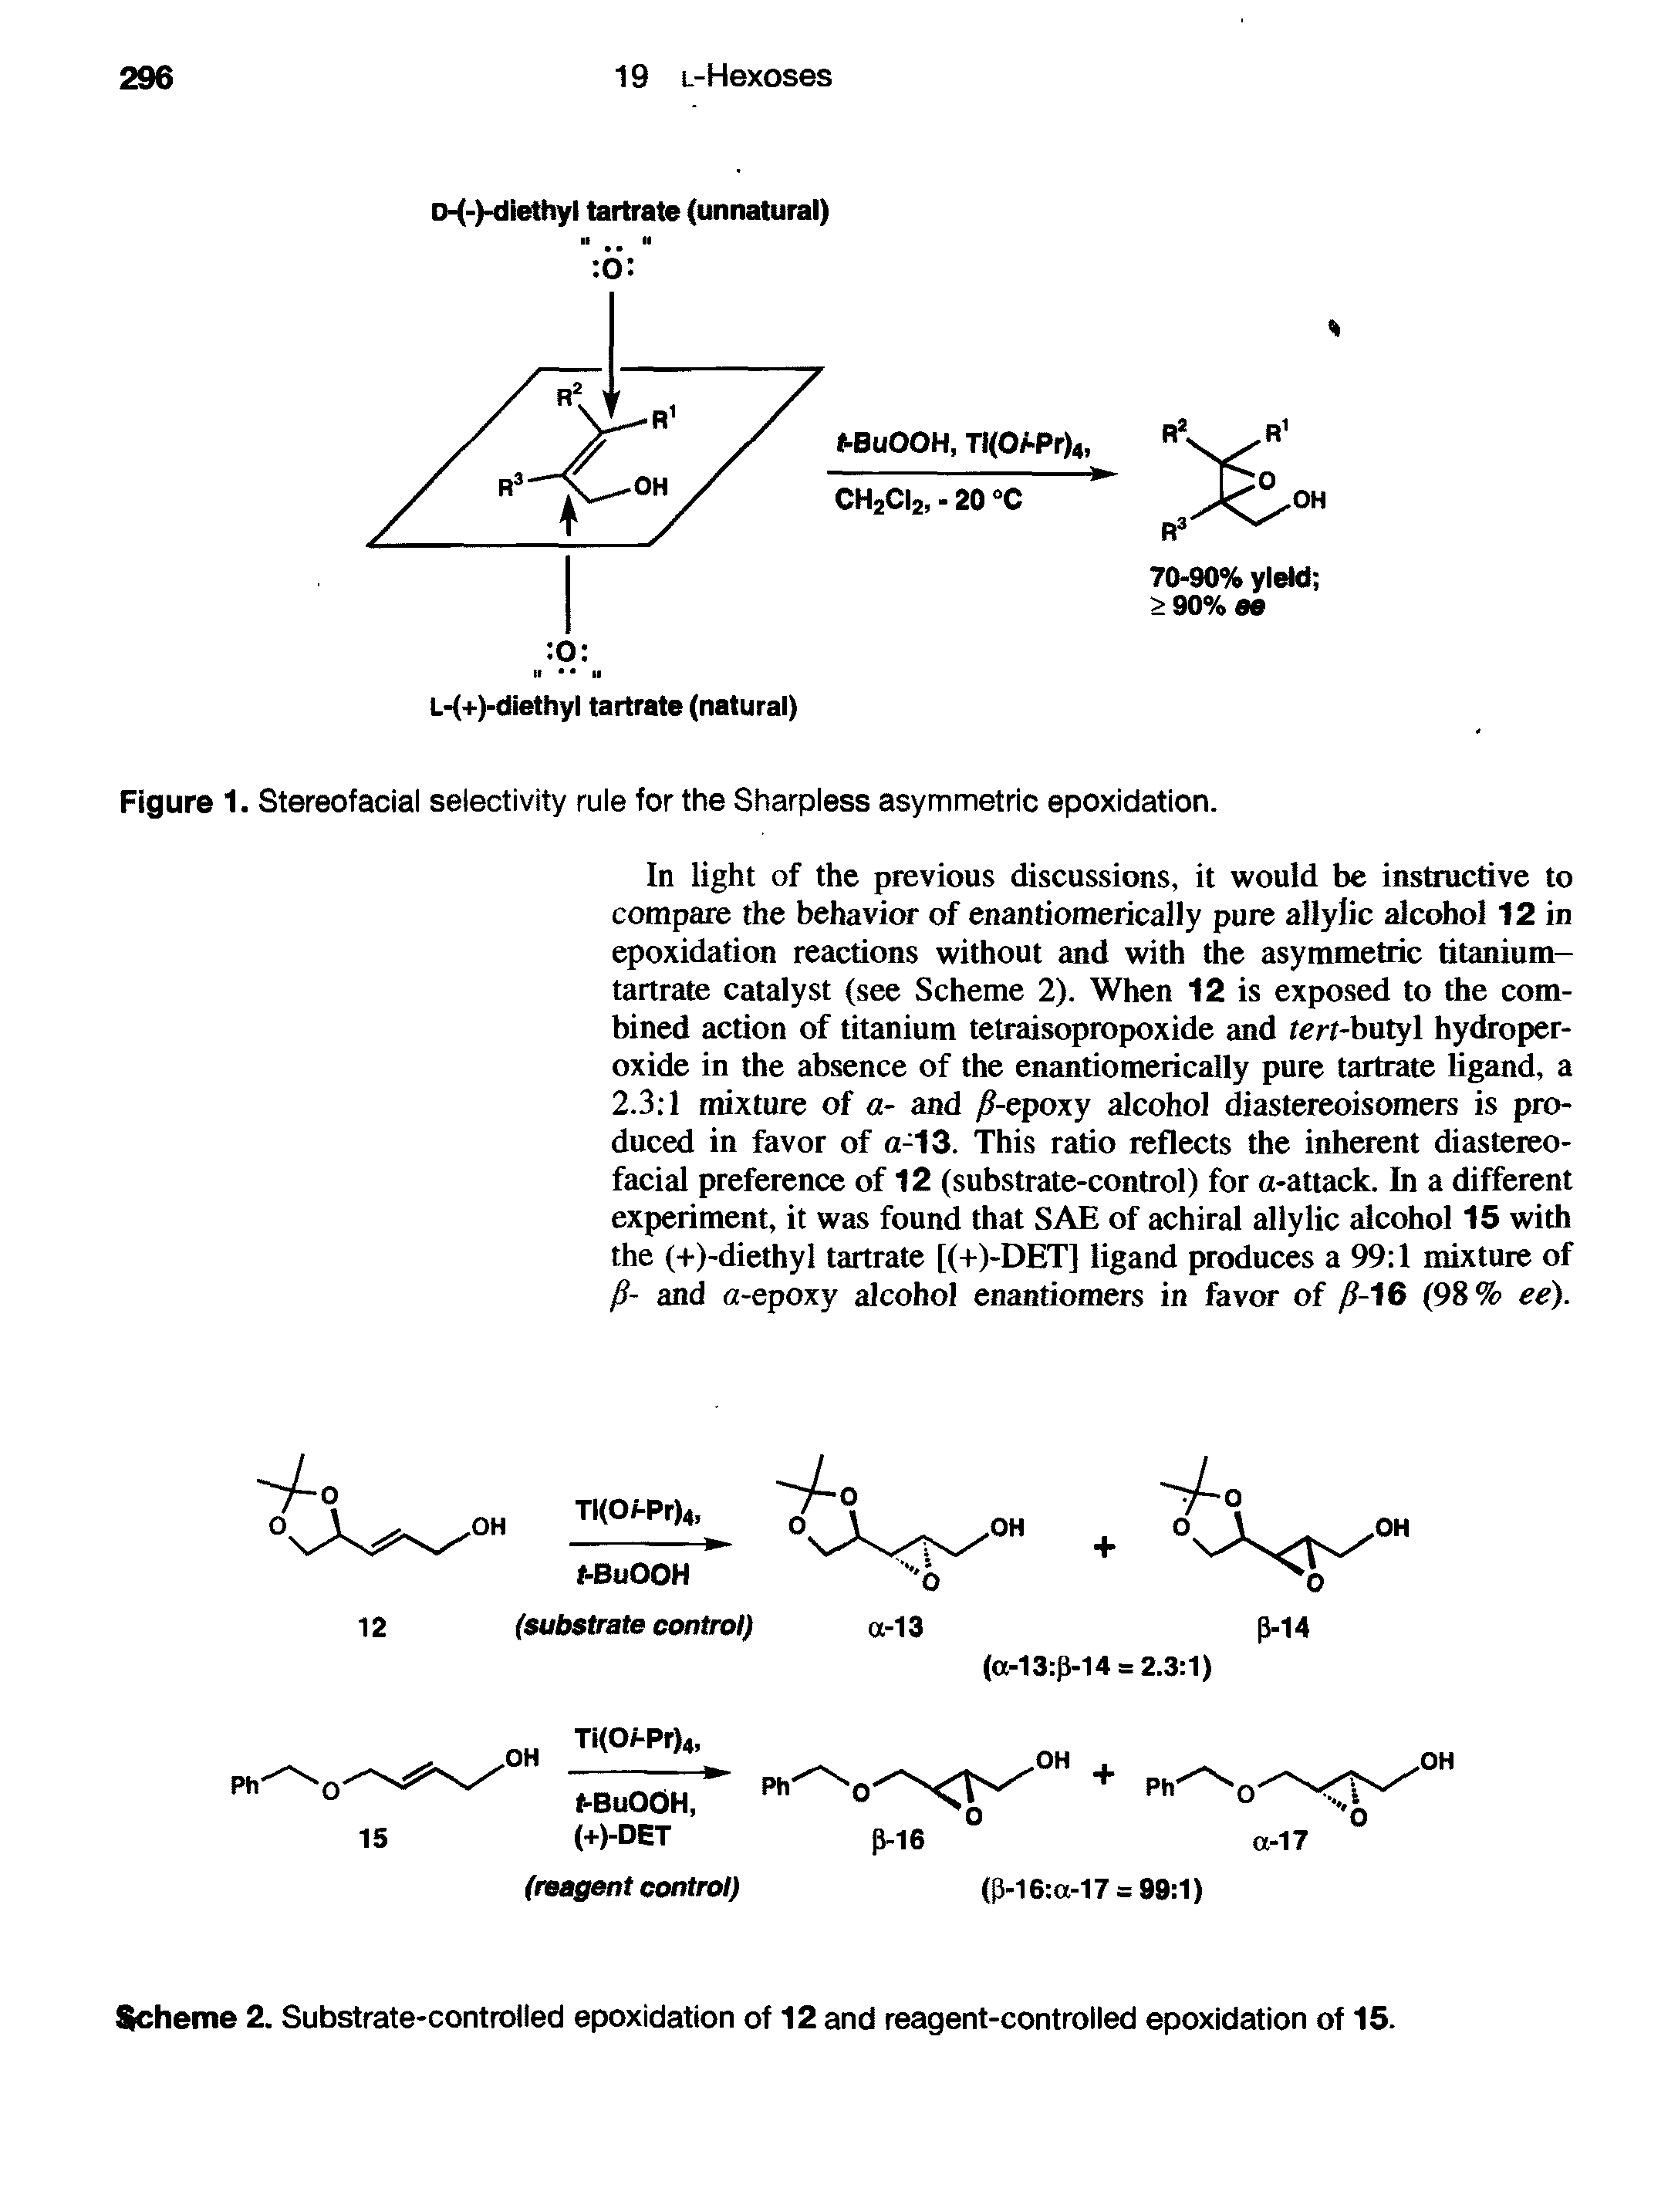 Scheme 2. Substrate-controlled epoxidation of 12 and reagent-controlled epoxidation of 15.